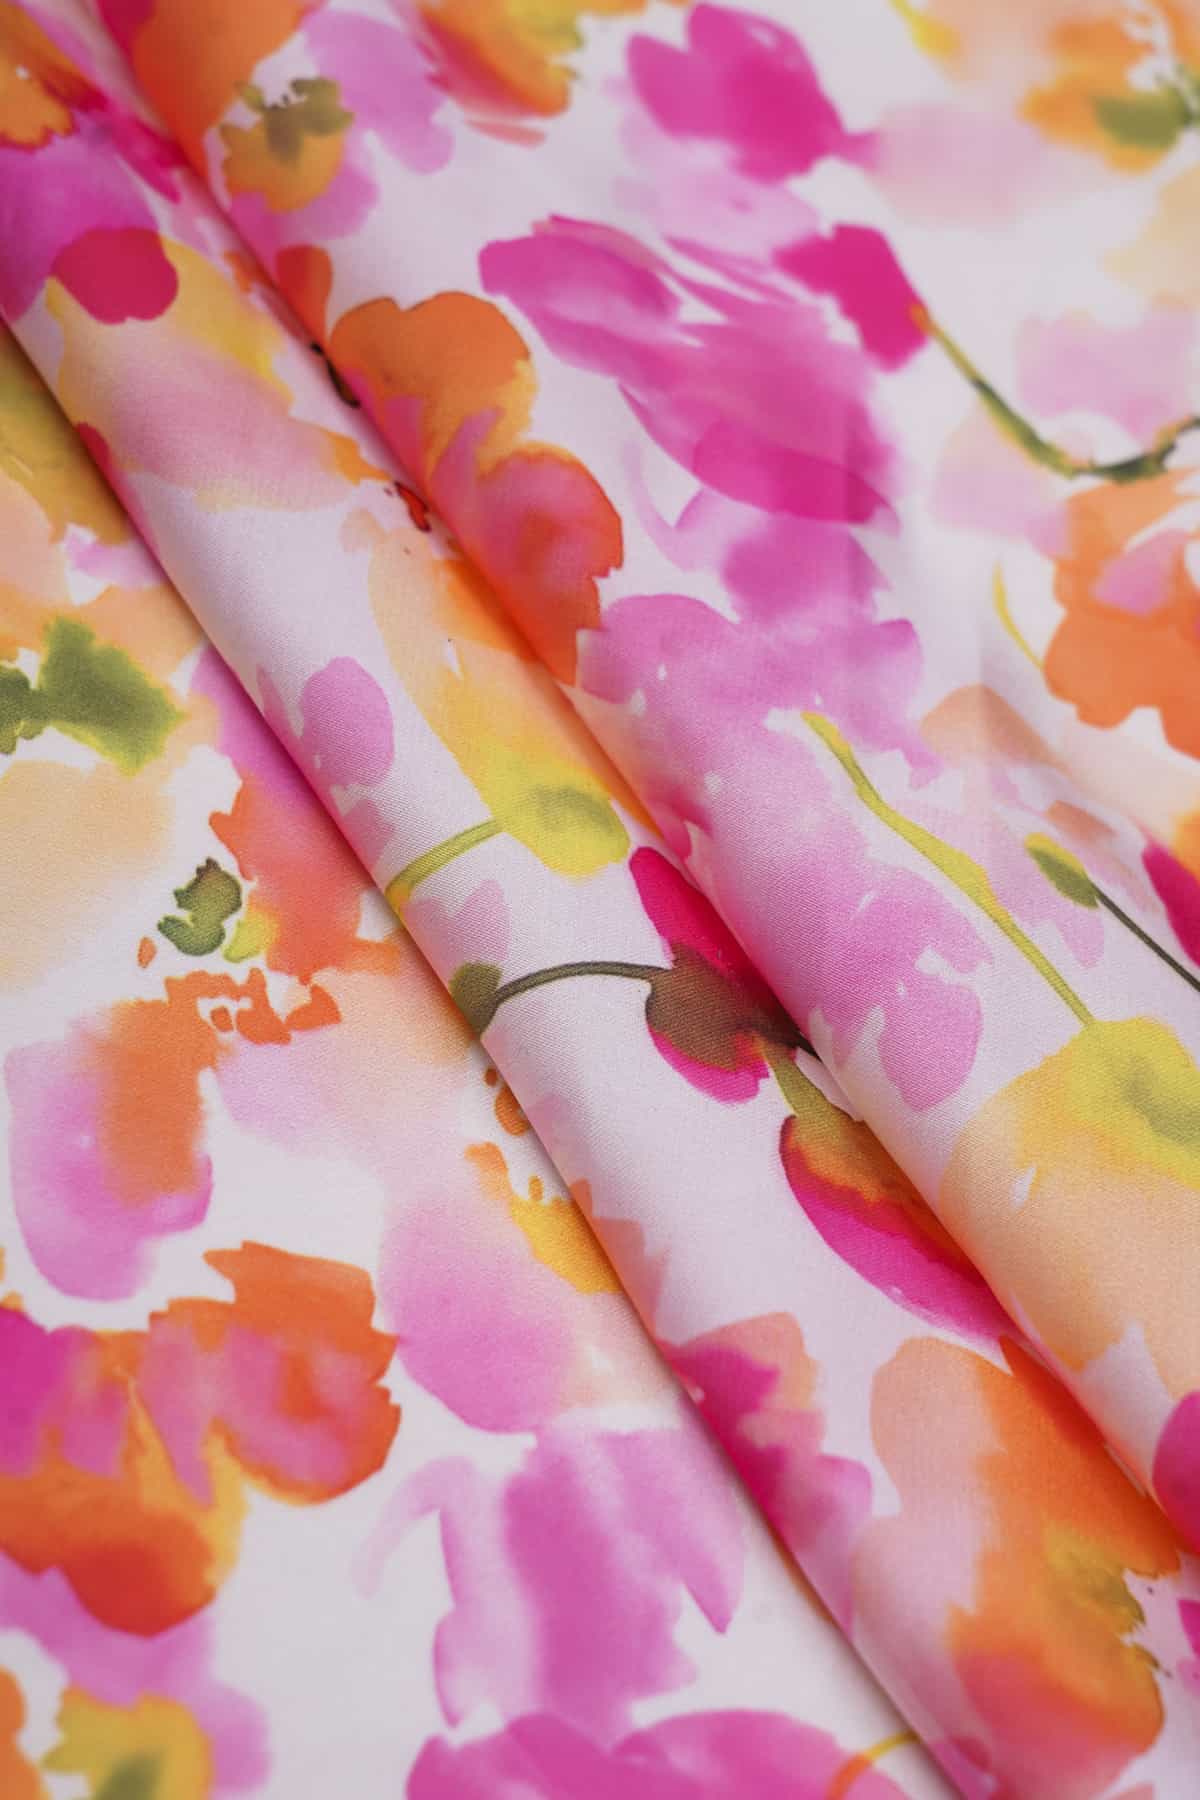 Abstract Floral Pattern Digitally Printed on Charmie Satin